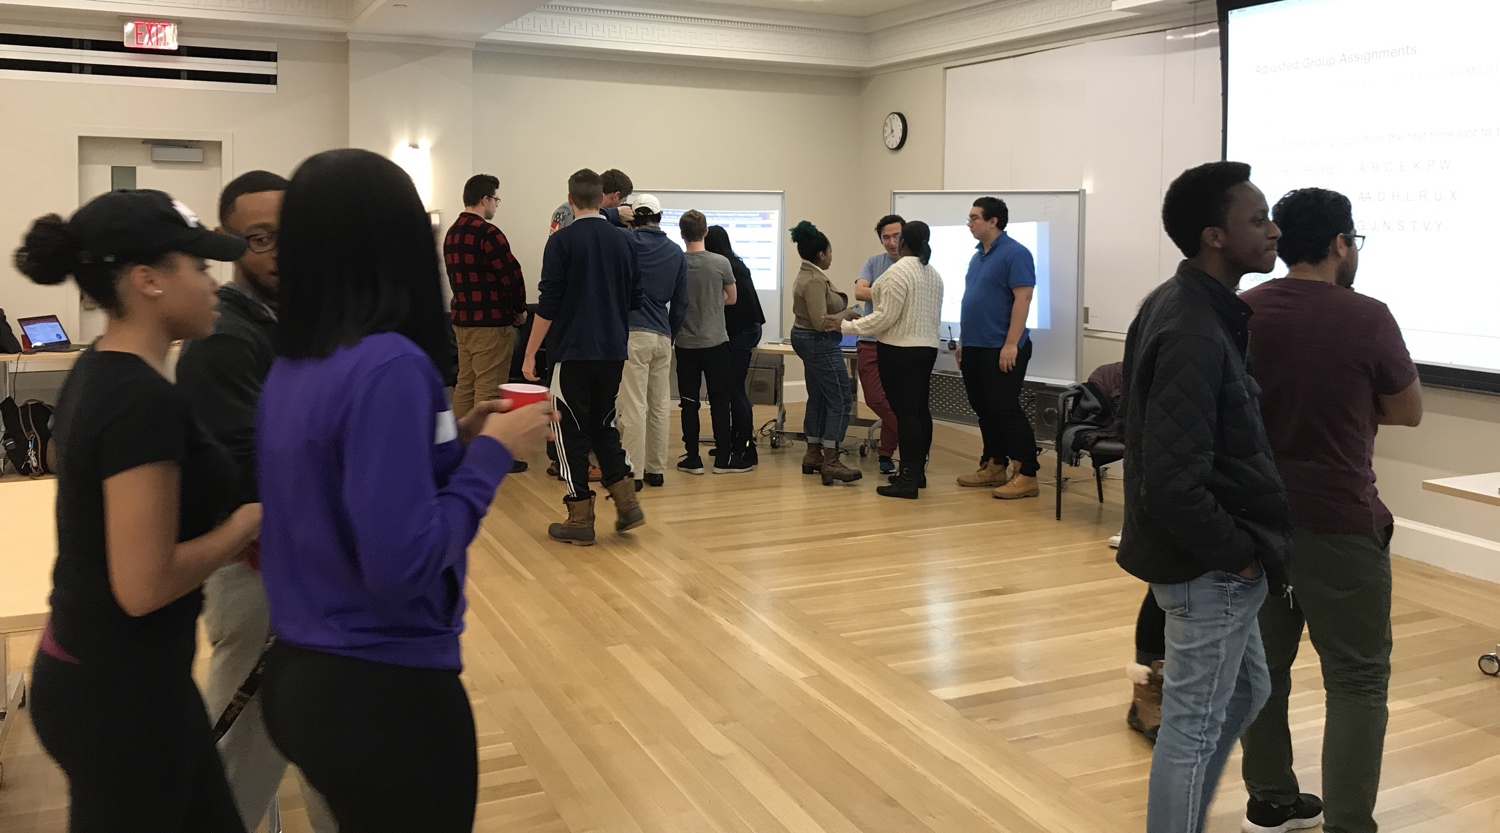 Poster Session, Fall 2018: Sweating the Details
                               